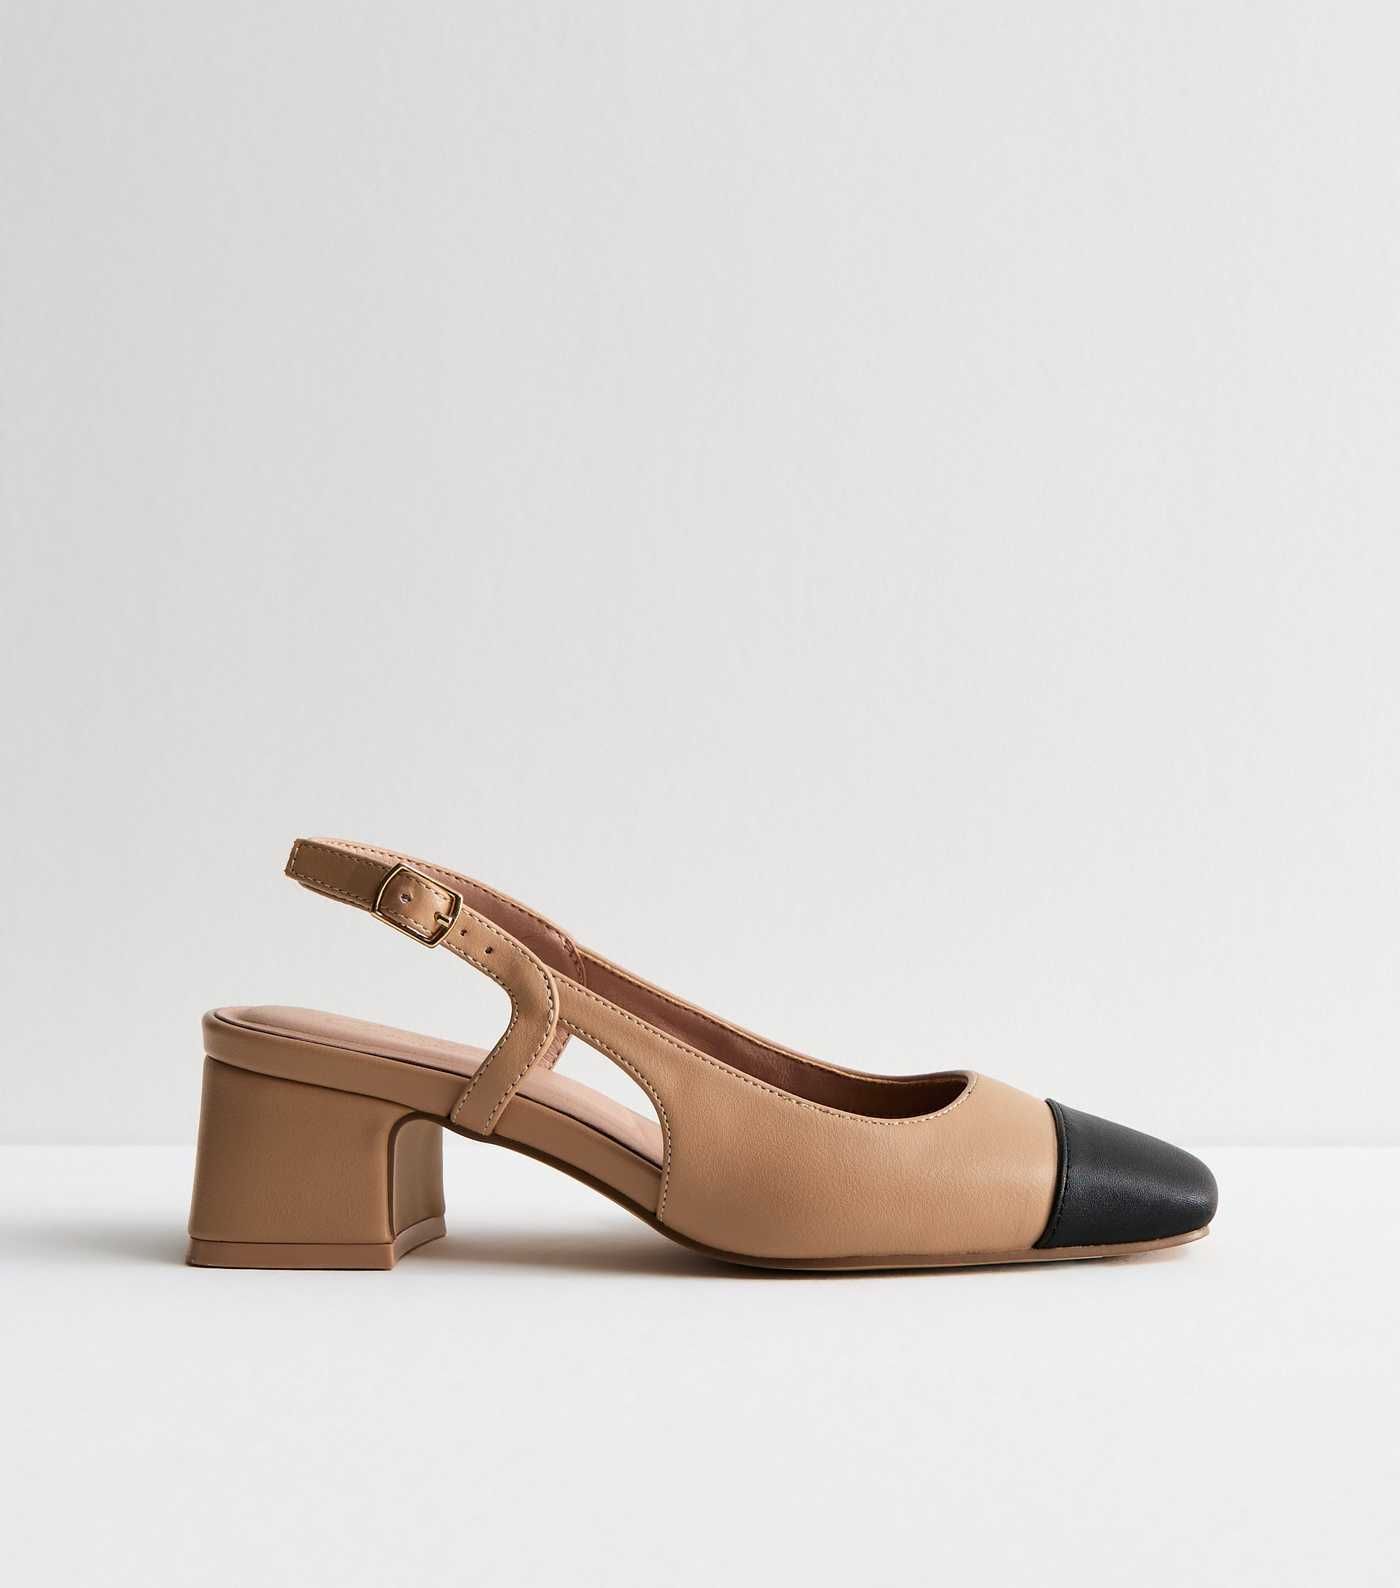 Camel Leather-Look Slingback Block Heel Court Shoes
						
						Add to Saved Items
						Remove ... | New Look (UK)